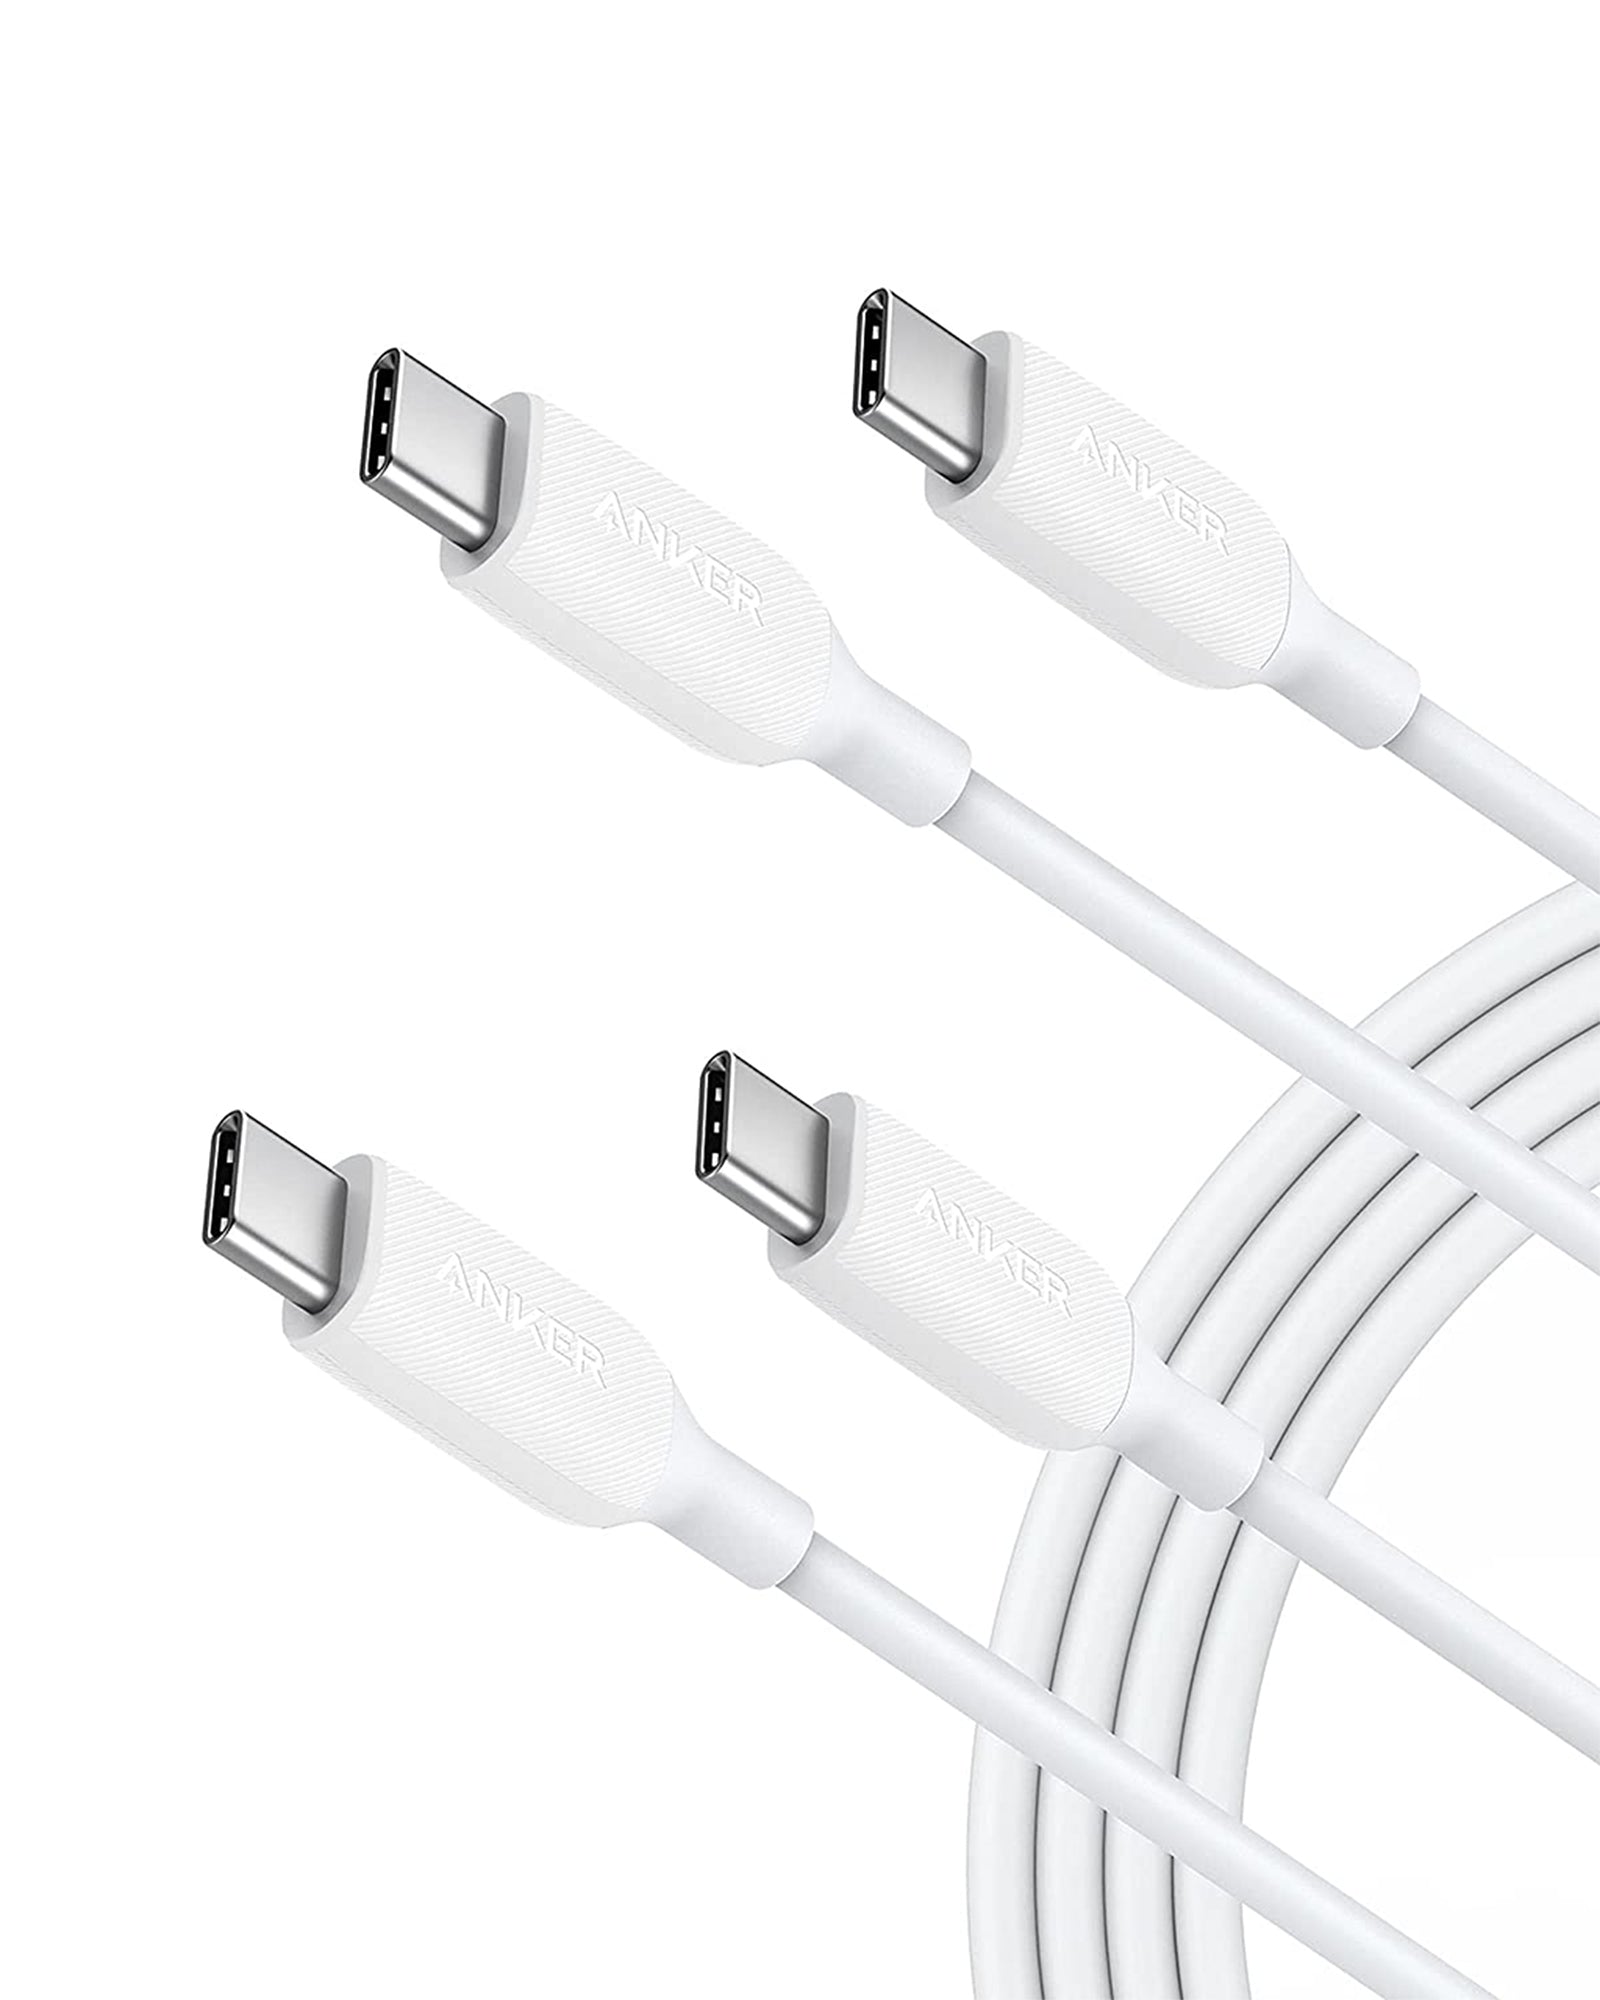 Anker unveils MFi USB-C to Lightning cables slated for March,  Kickstarter-backed alternative promised for April - 9to5Mac